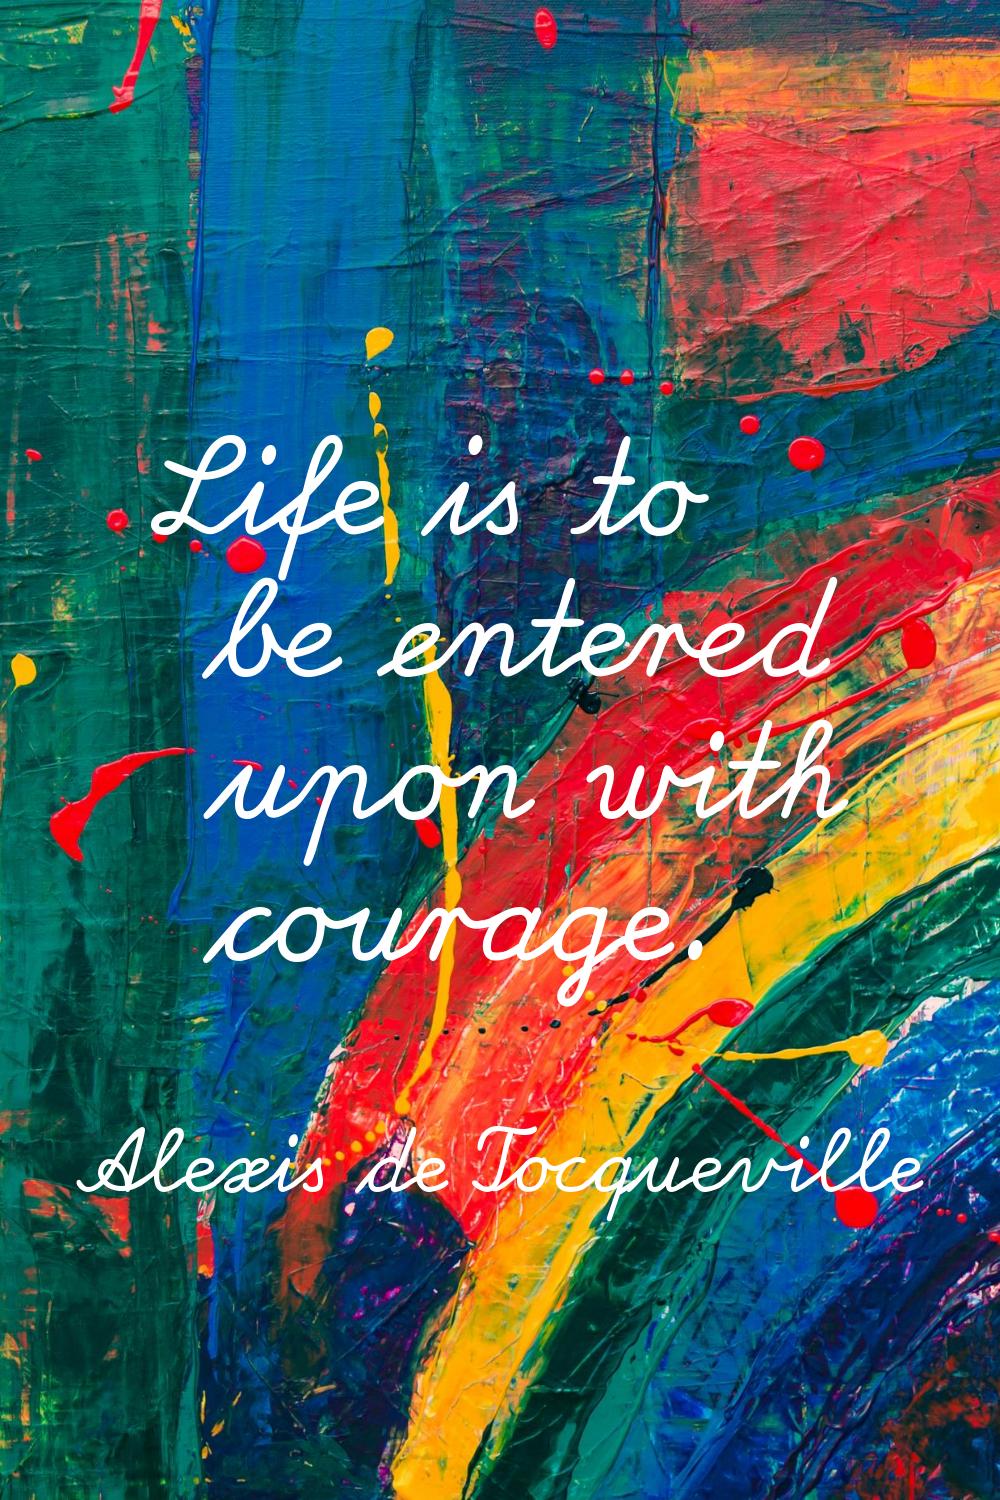 Life is to be entered upon with courage.